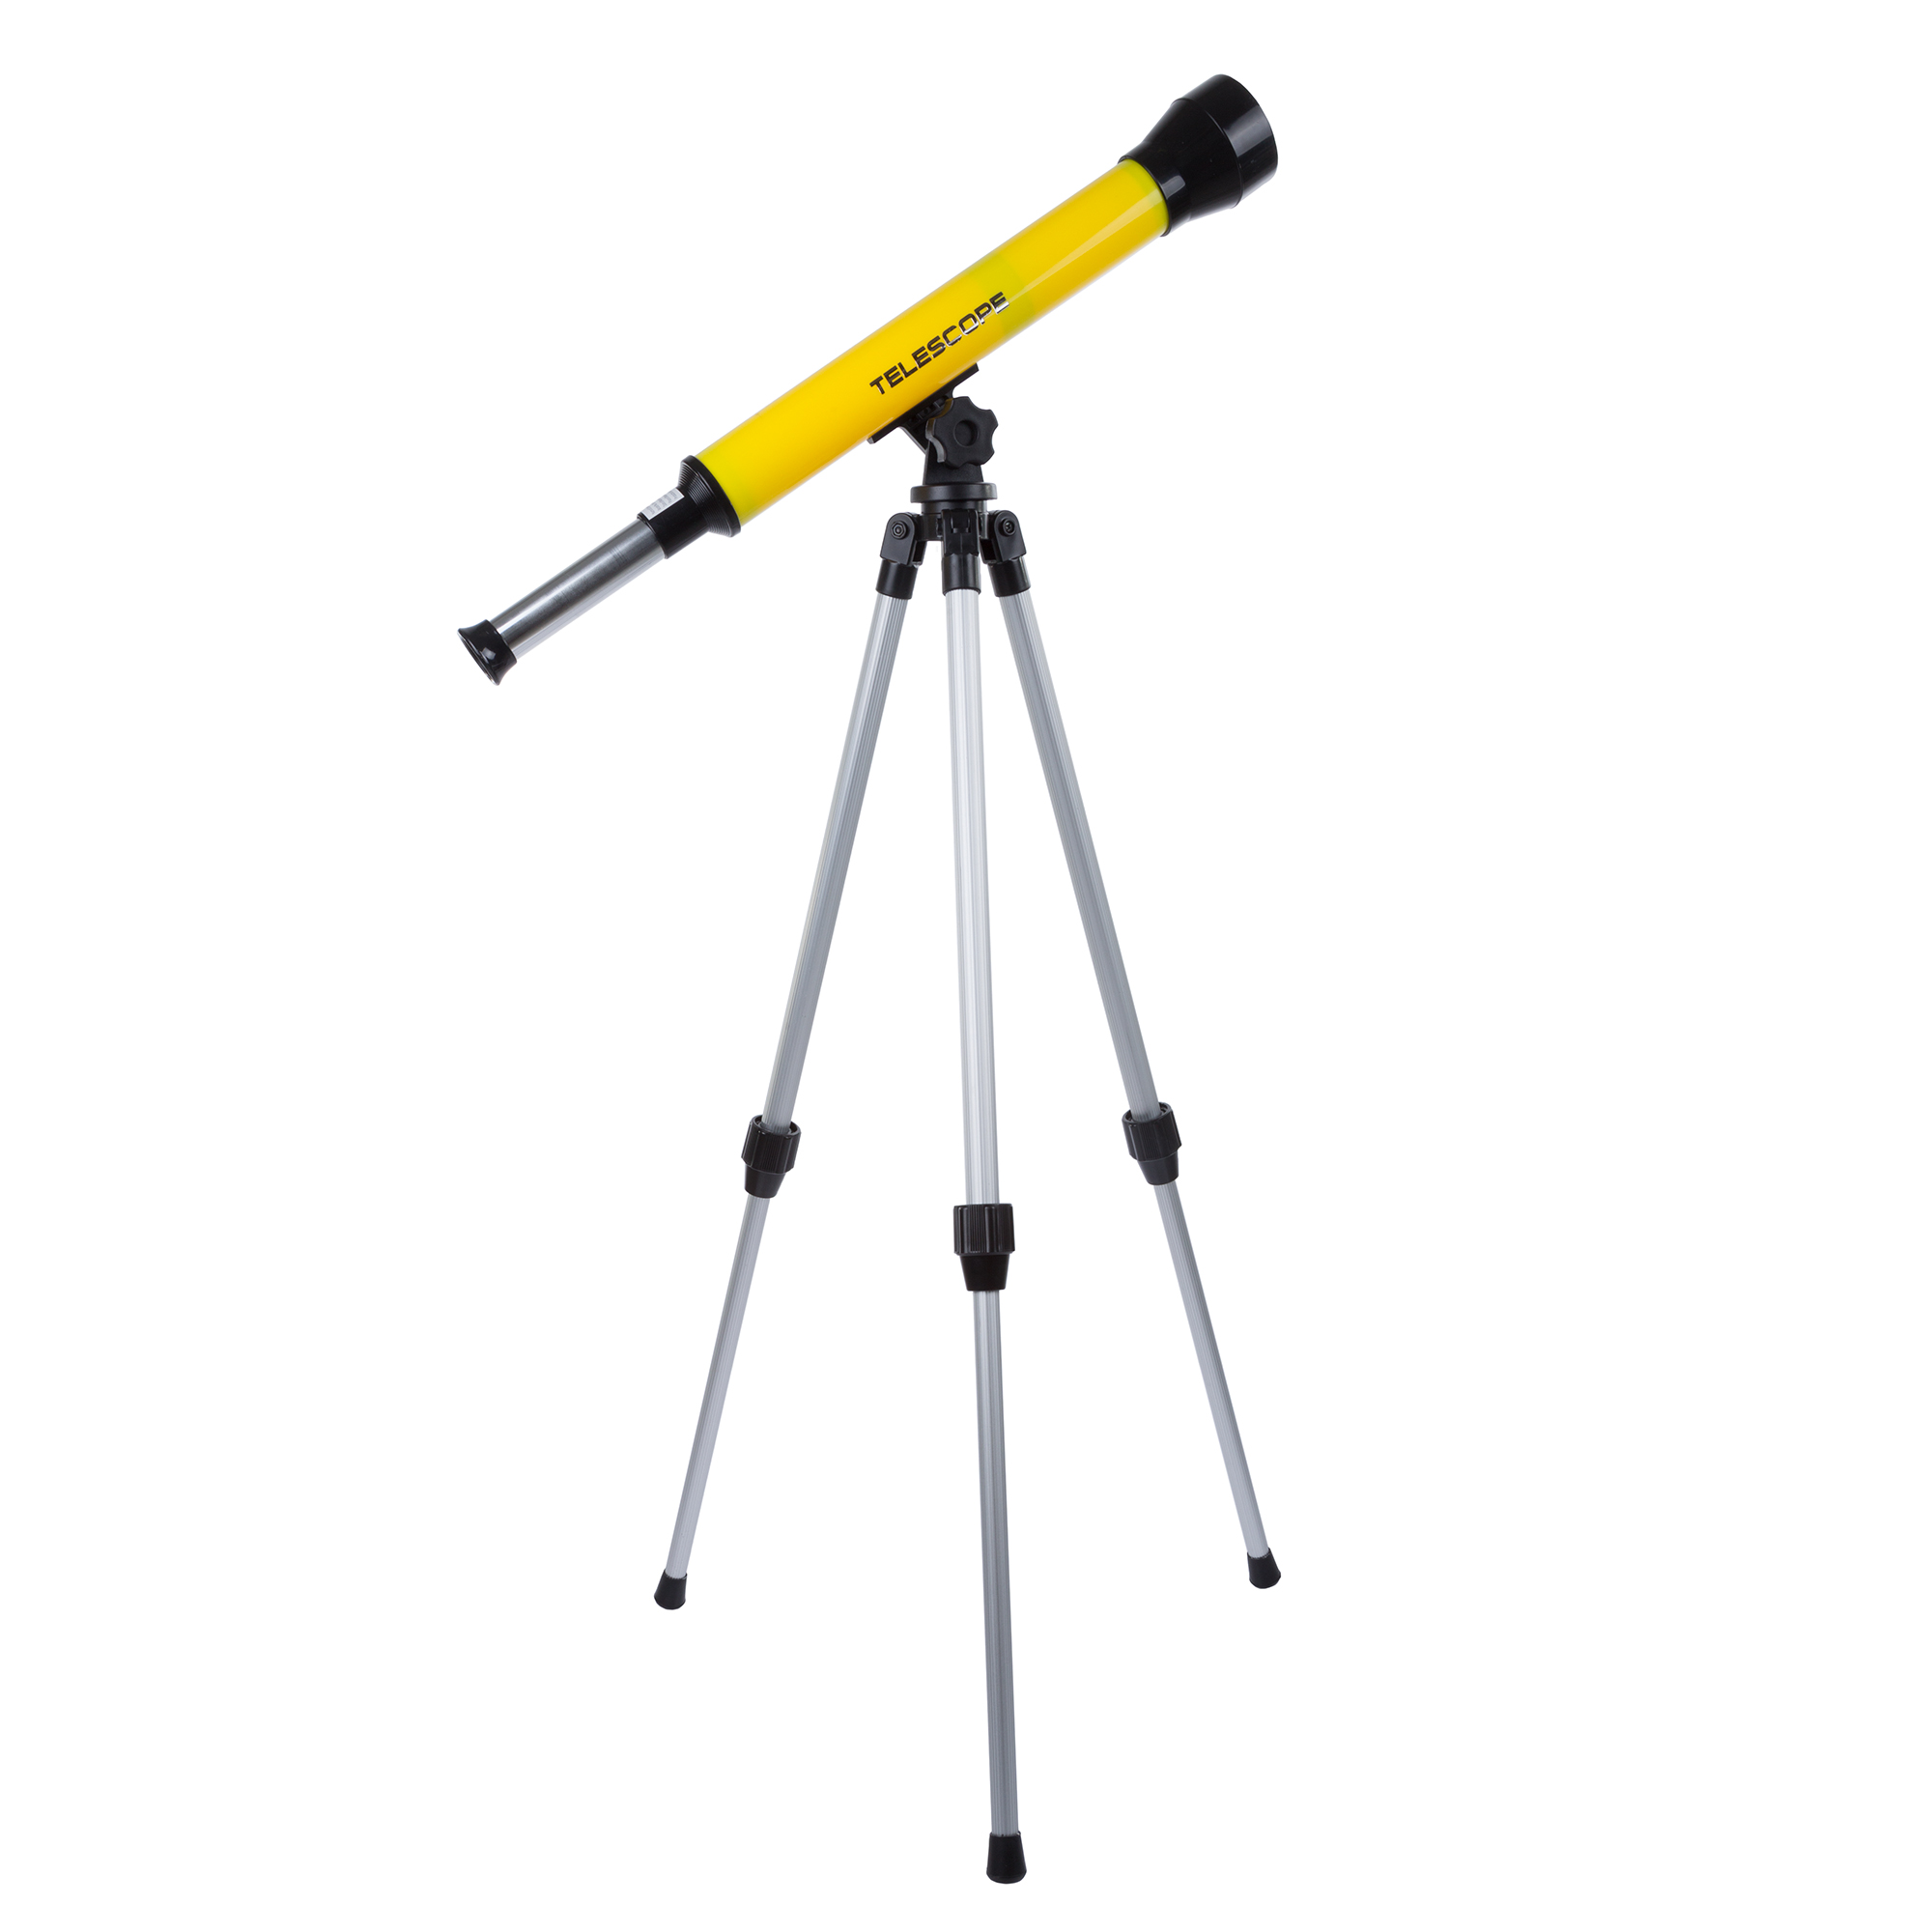 Telescope for Kids - 30x Magnification by Hey! Play! - image 1 of 4